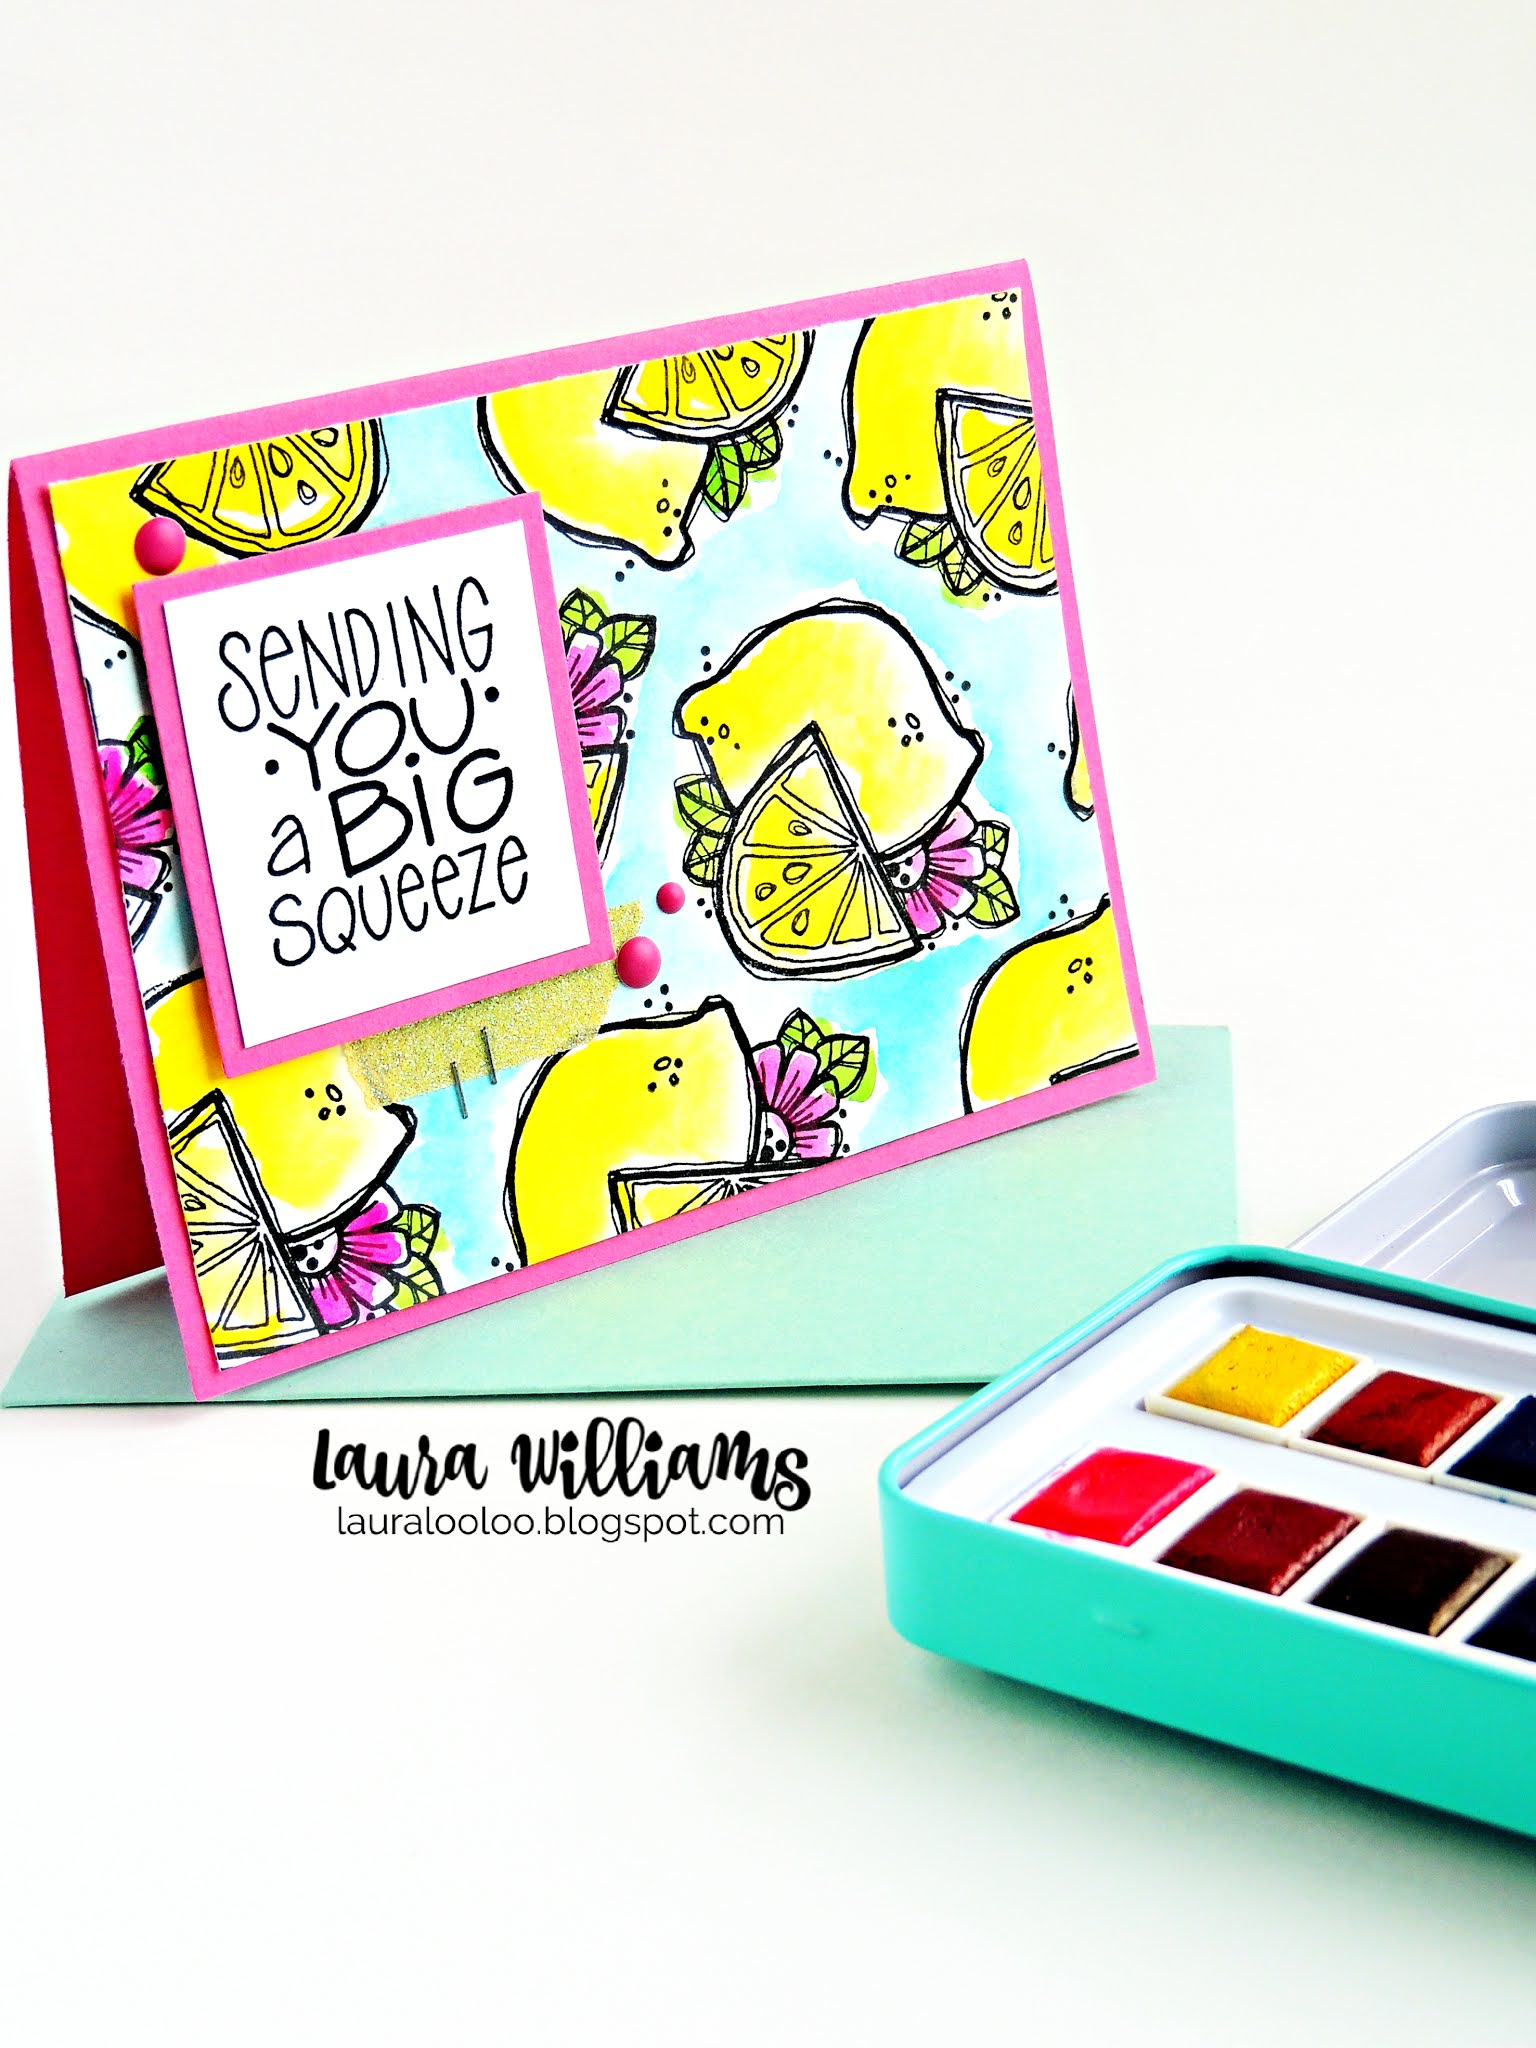 Make a fresh summer handmade card with lemon stamps from Impression Obsession and watercolor paints for a colorful and fruity fun card making project. Stop by my blog to see all the details on this summery handmade card idea!